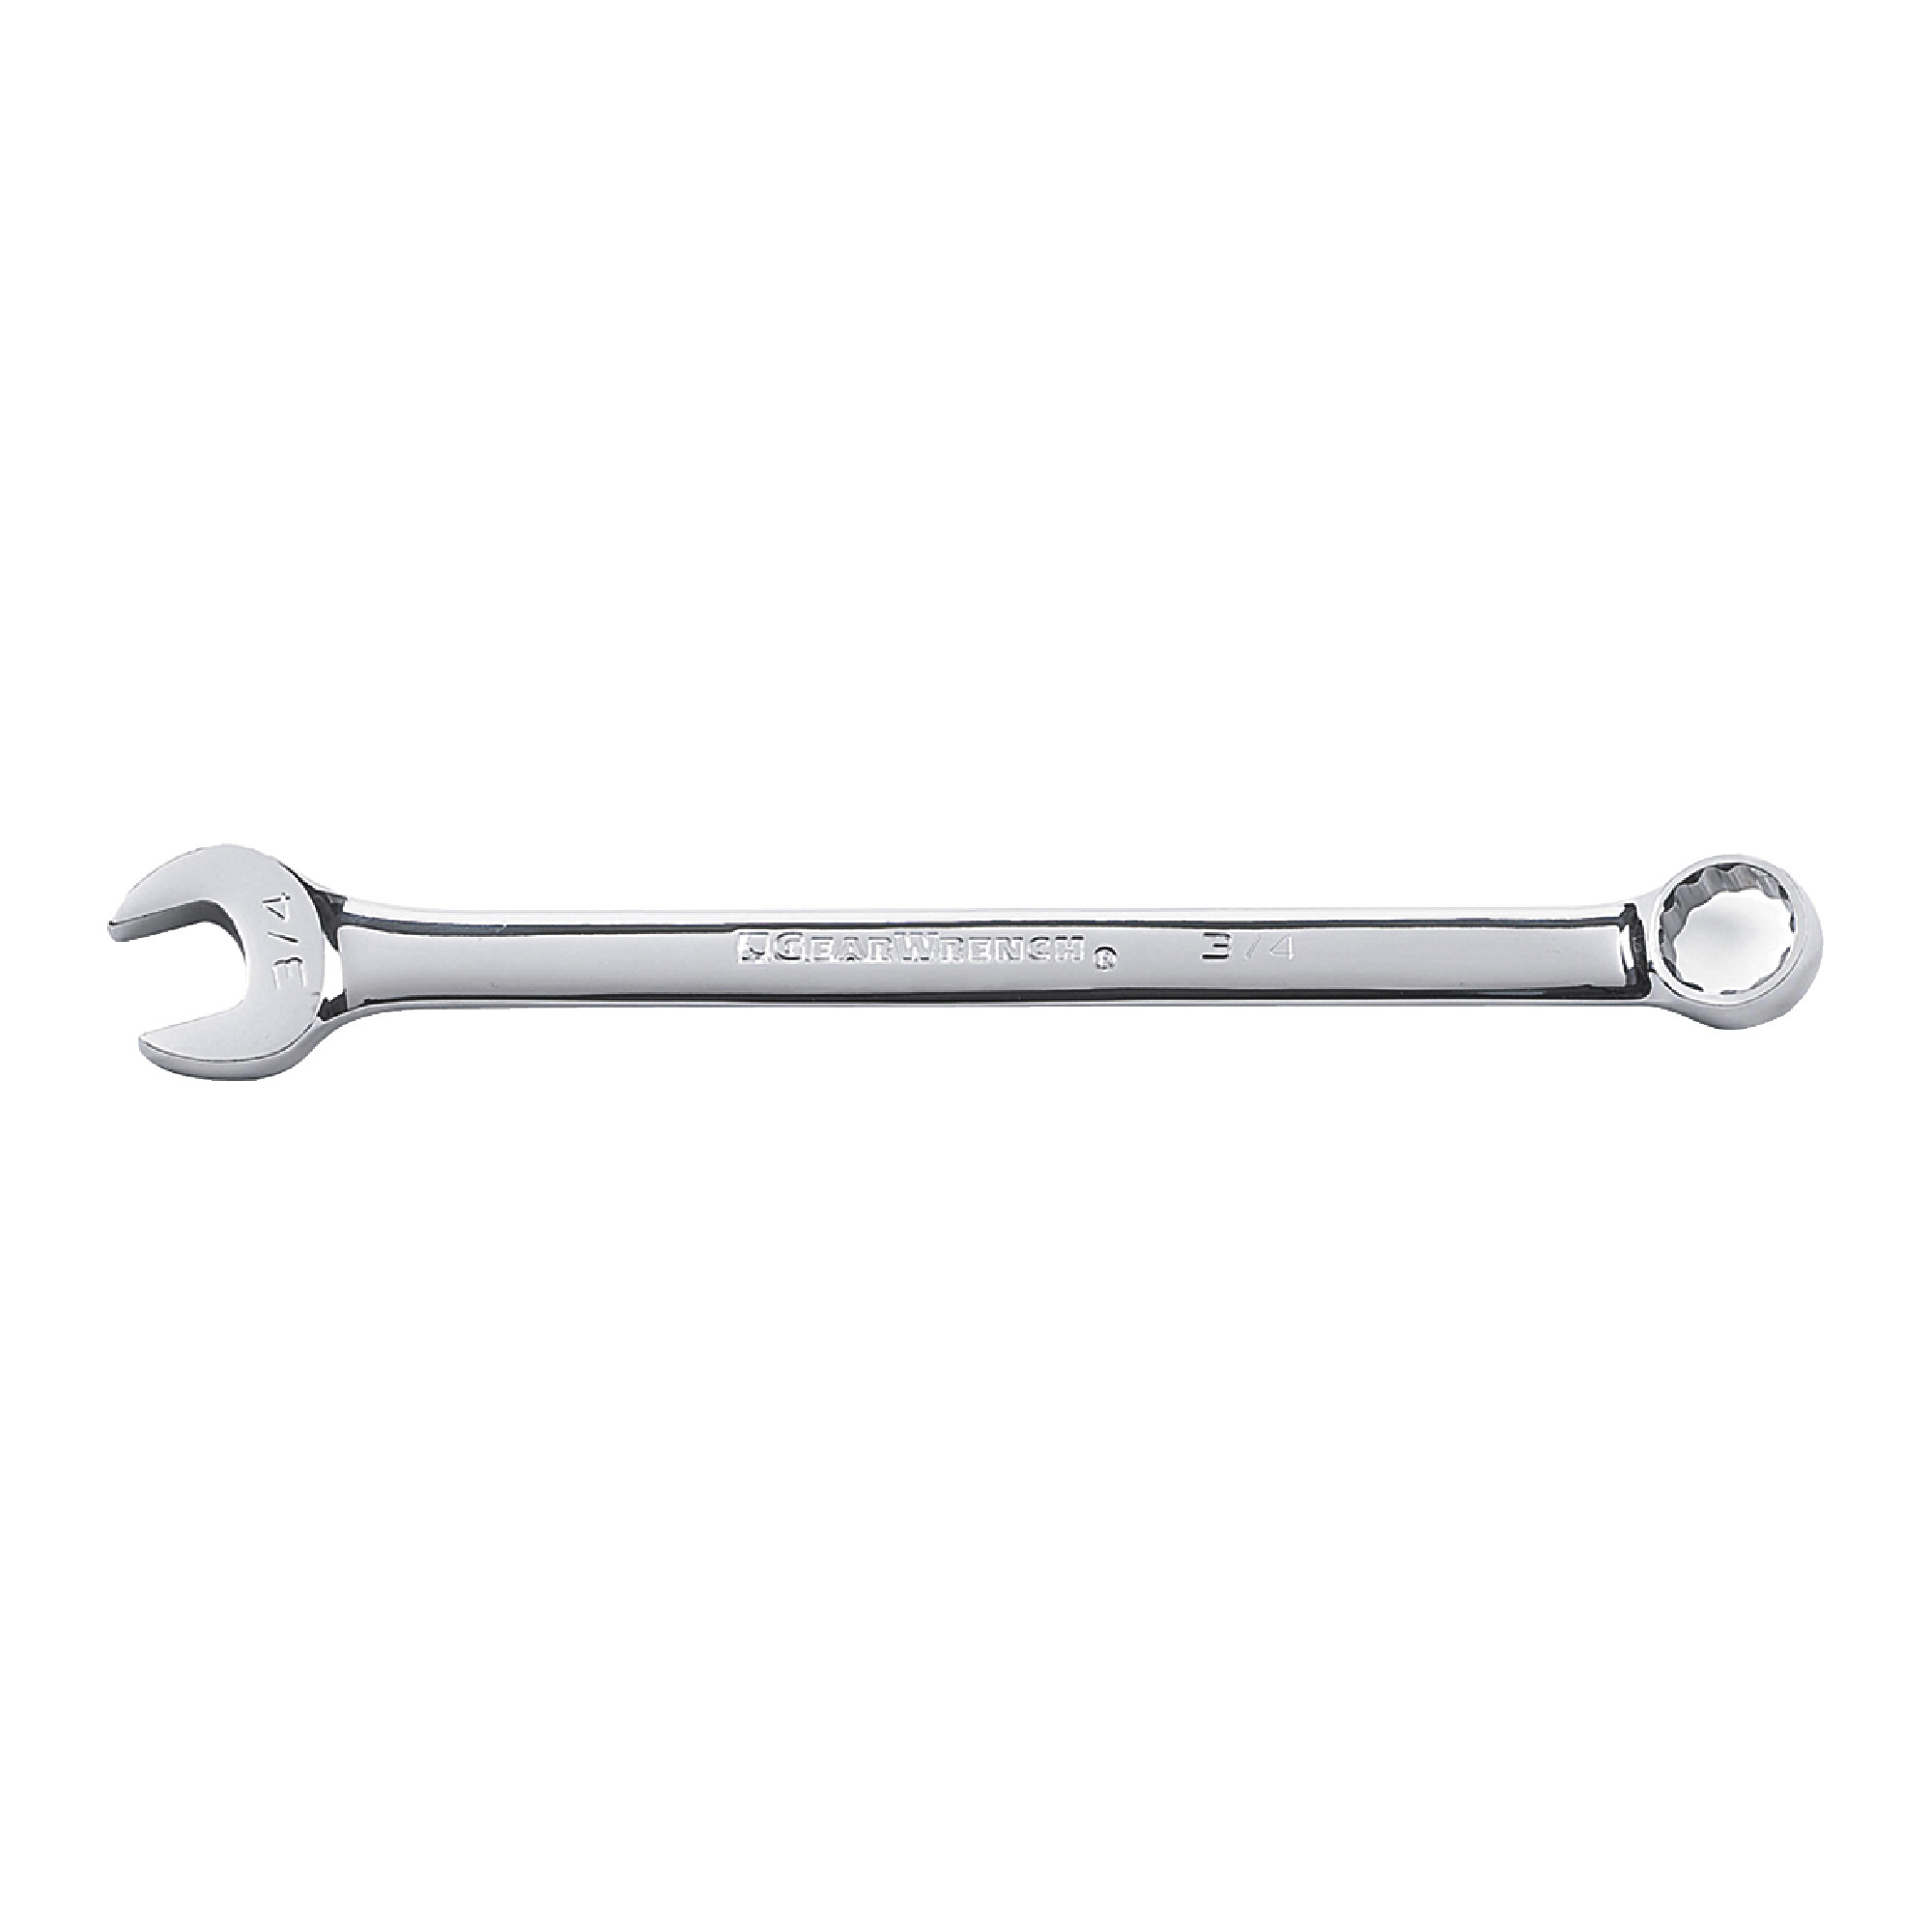 19mm 12 Point Long Pattern Combination Wrench